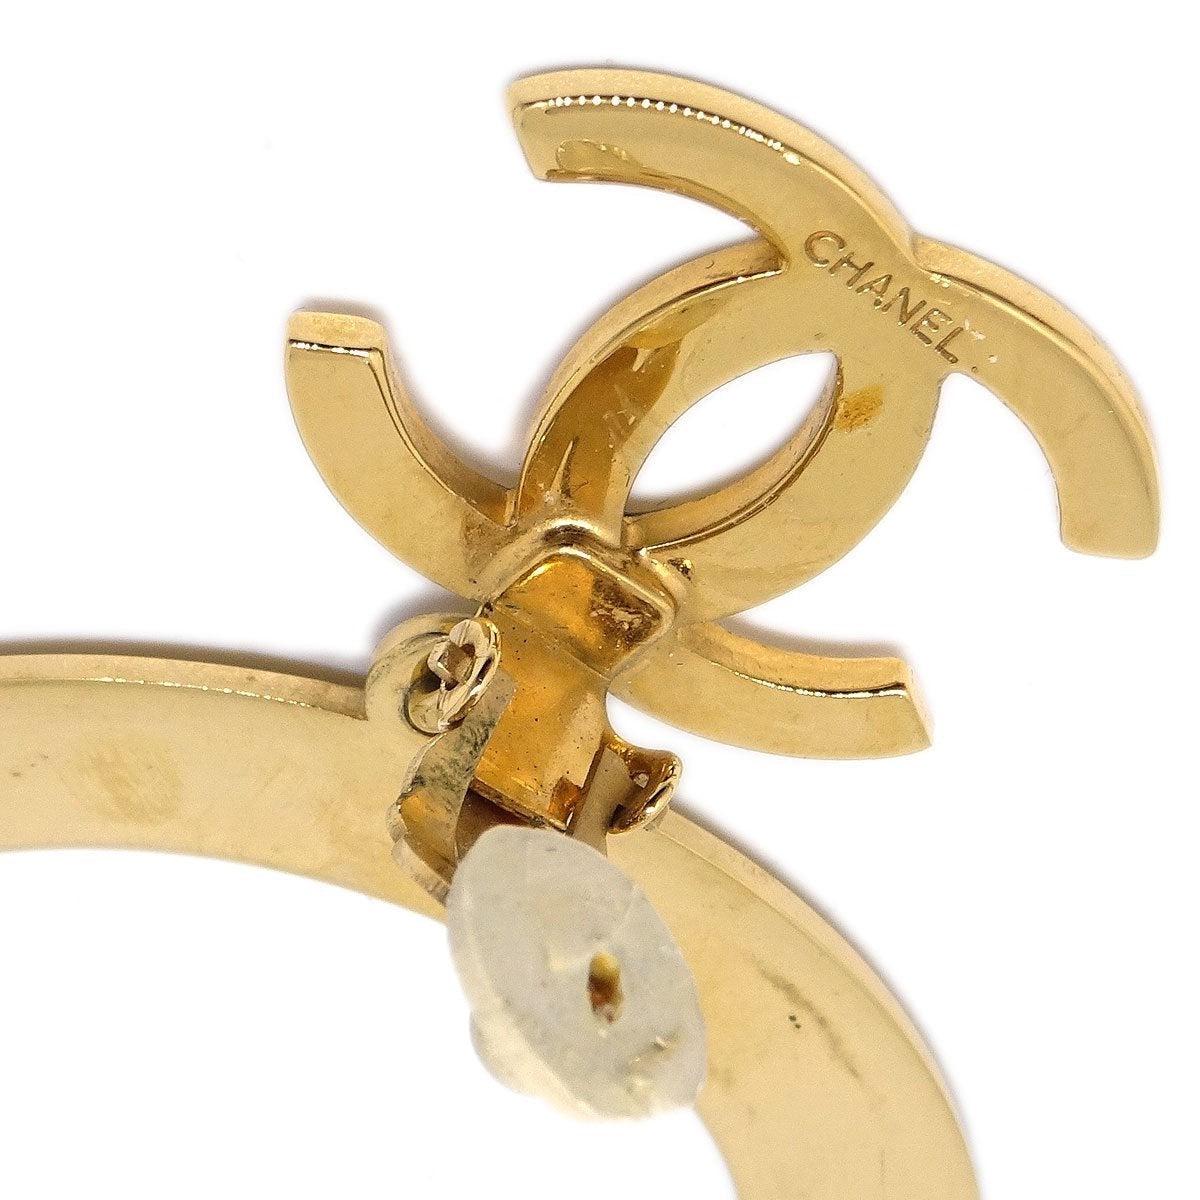 Pre-Owned Vintage Condition
From 1990's Collection
Metal
Gold Tone
Clip On Closure
Width 2.5